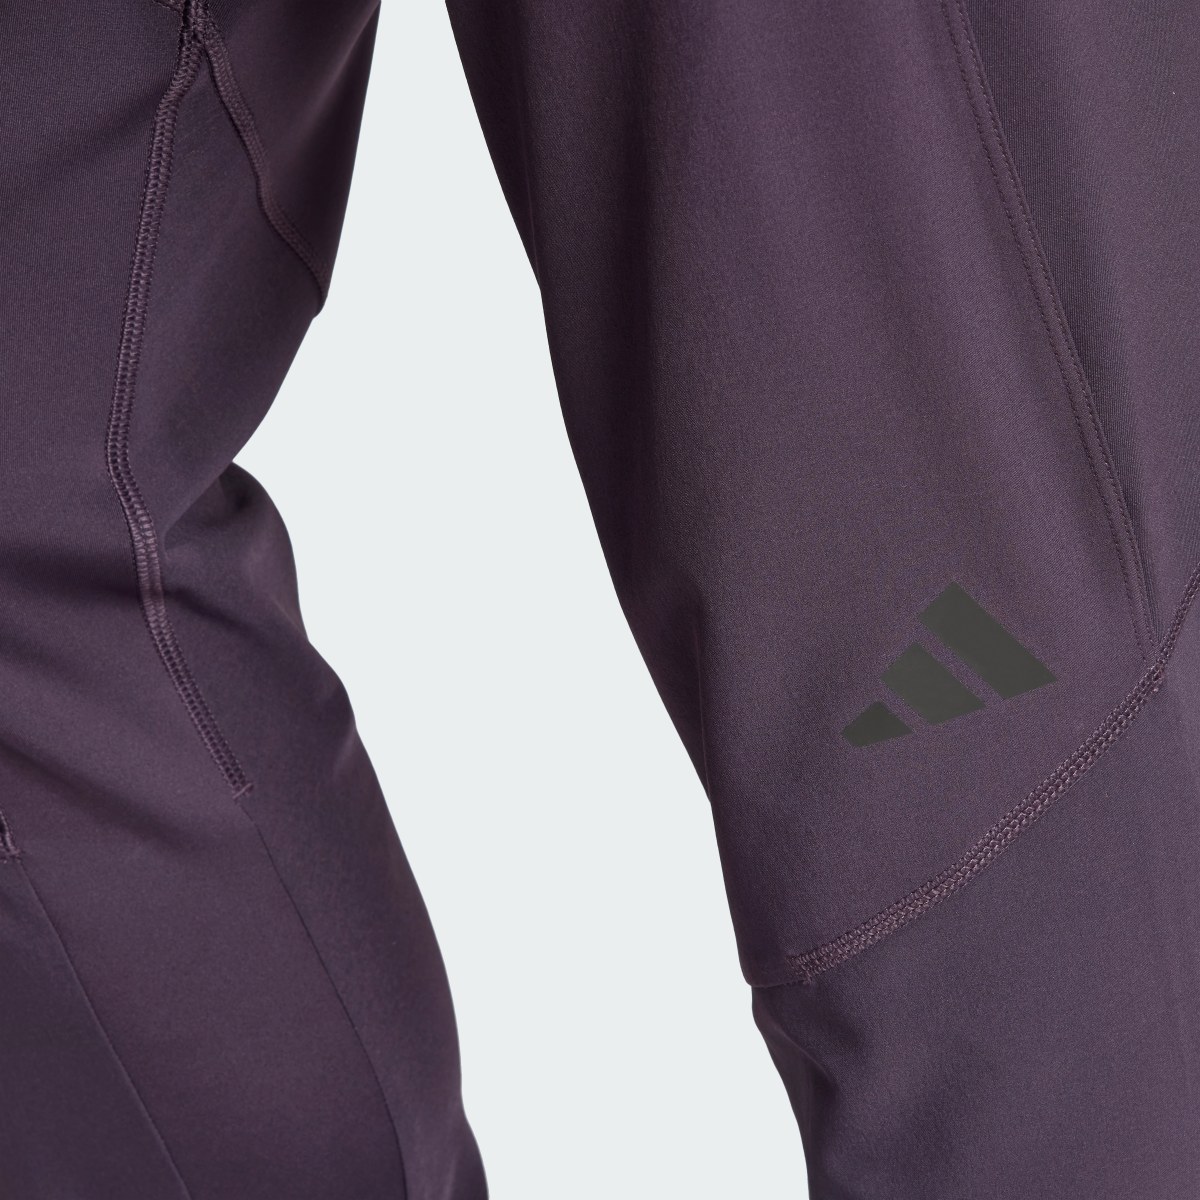 Adidas Designed for Training Workout Joggers. 6